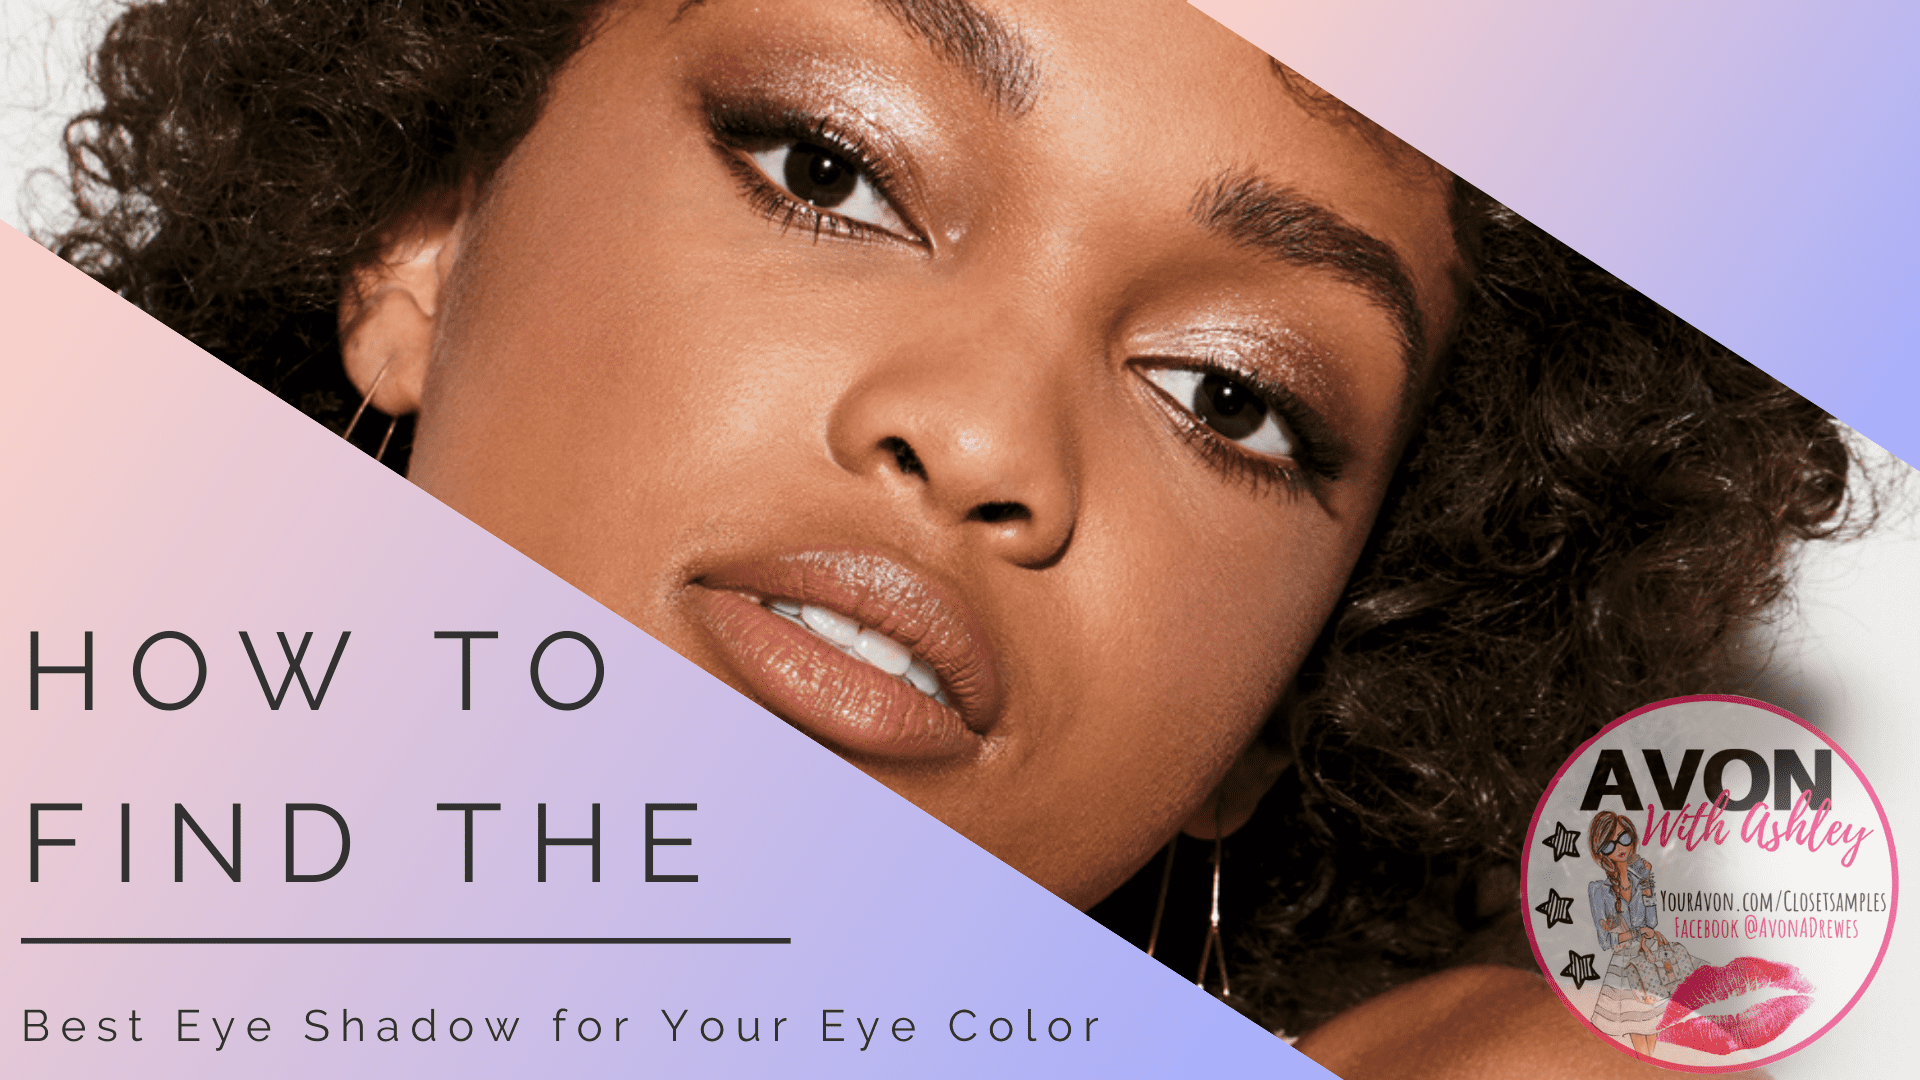 How to Find the Best Eye Shado...